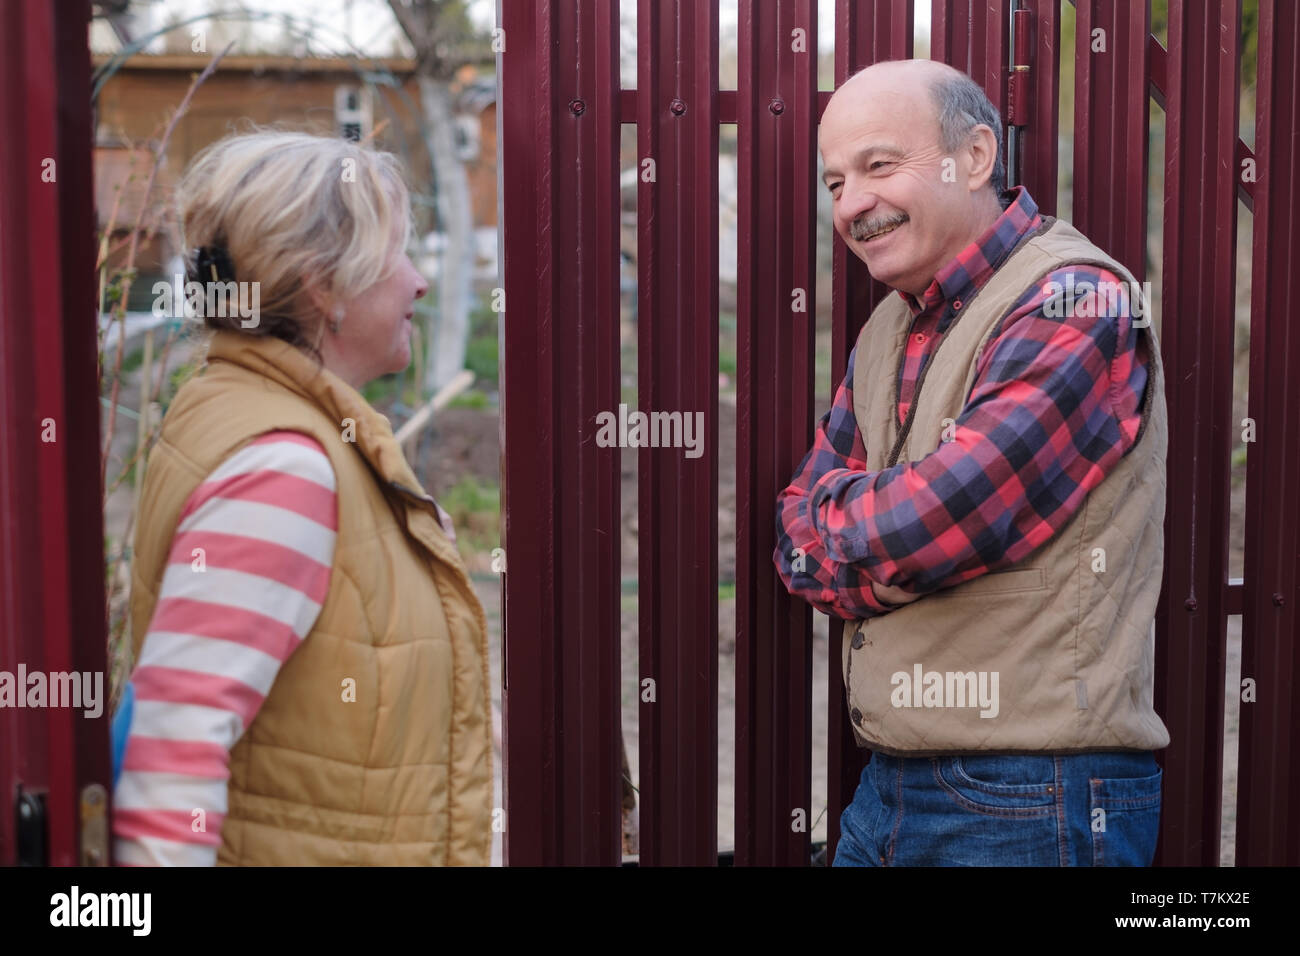 Two senior neighbors takling to each other on sunny day near fence. Stock Photo